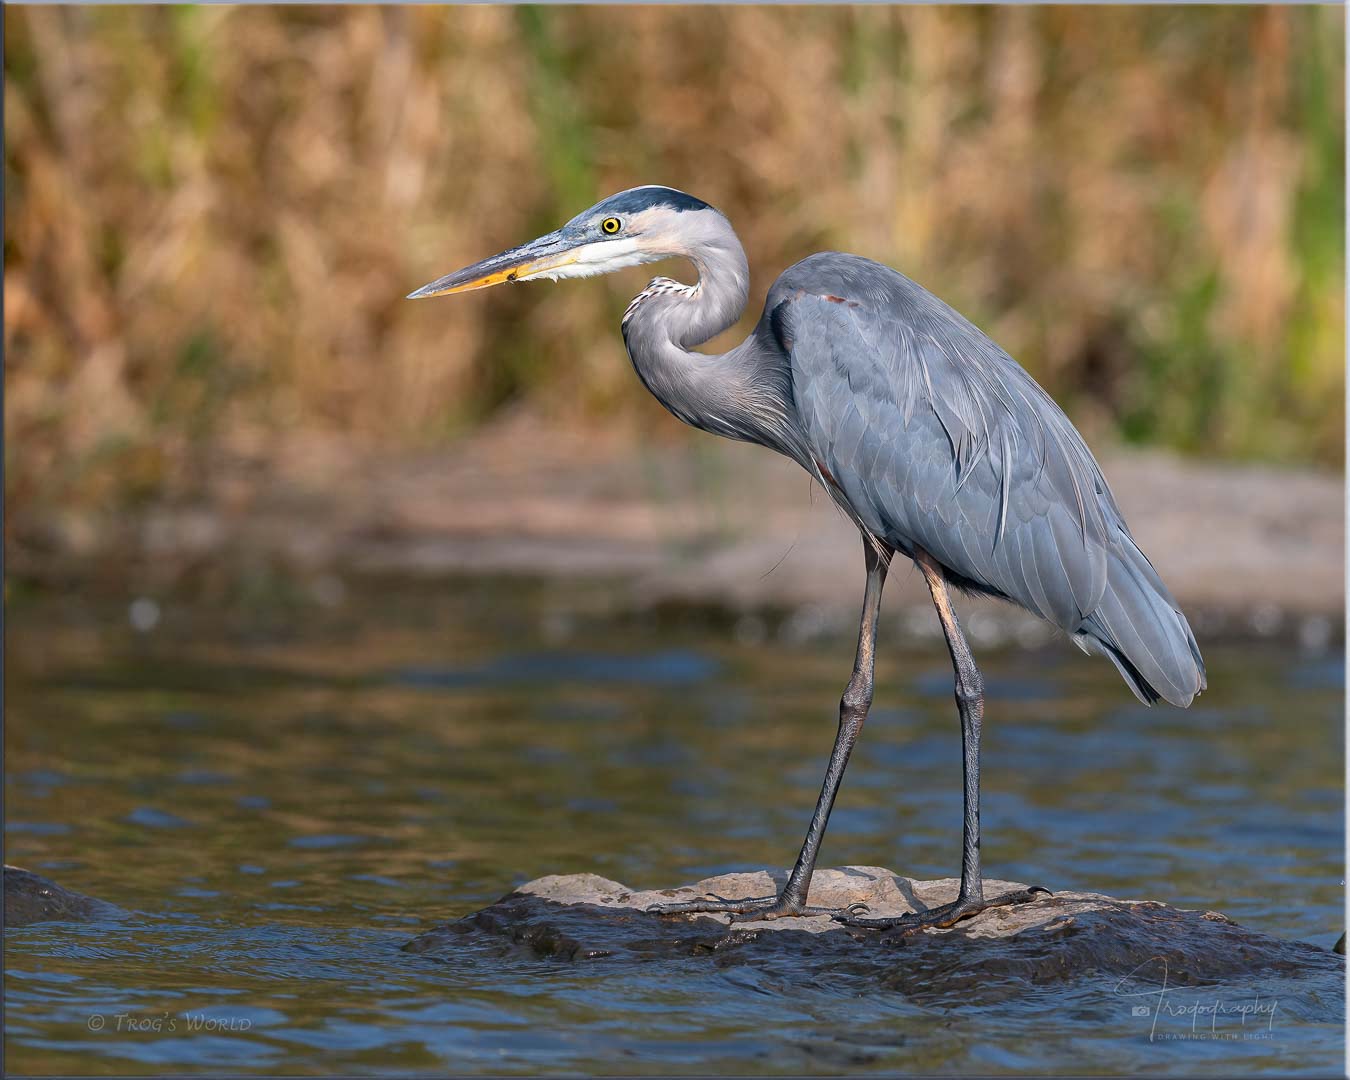 Profile of a Great Blue Heron